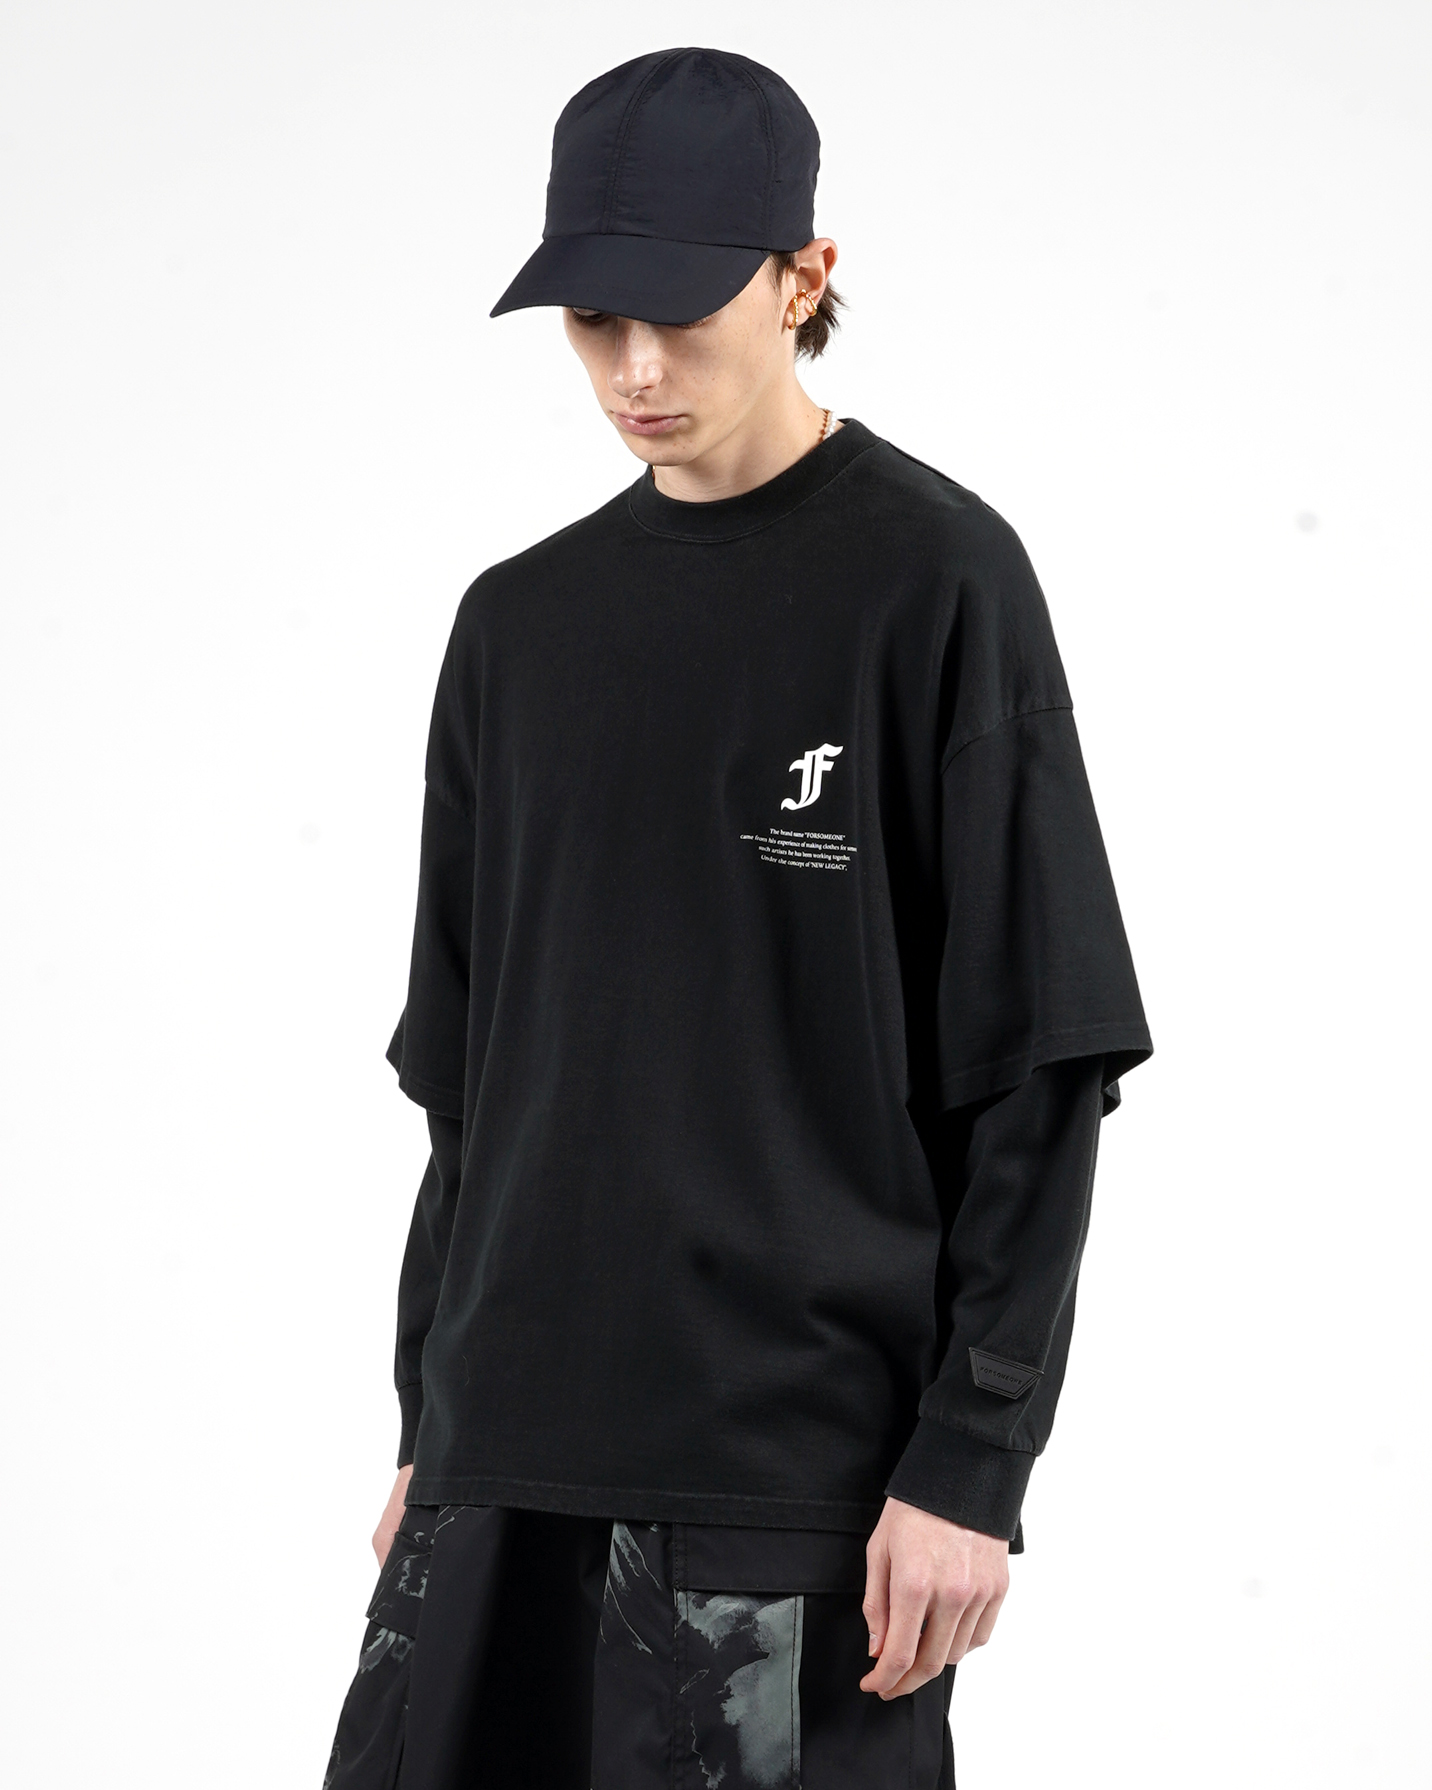 OLD LOGO LAYERED LS TEE | FORSOMEONE(フォーサムワン)公式ONLINE STORE